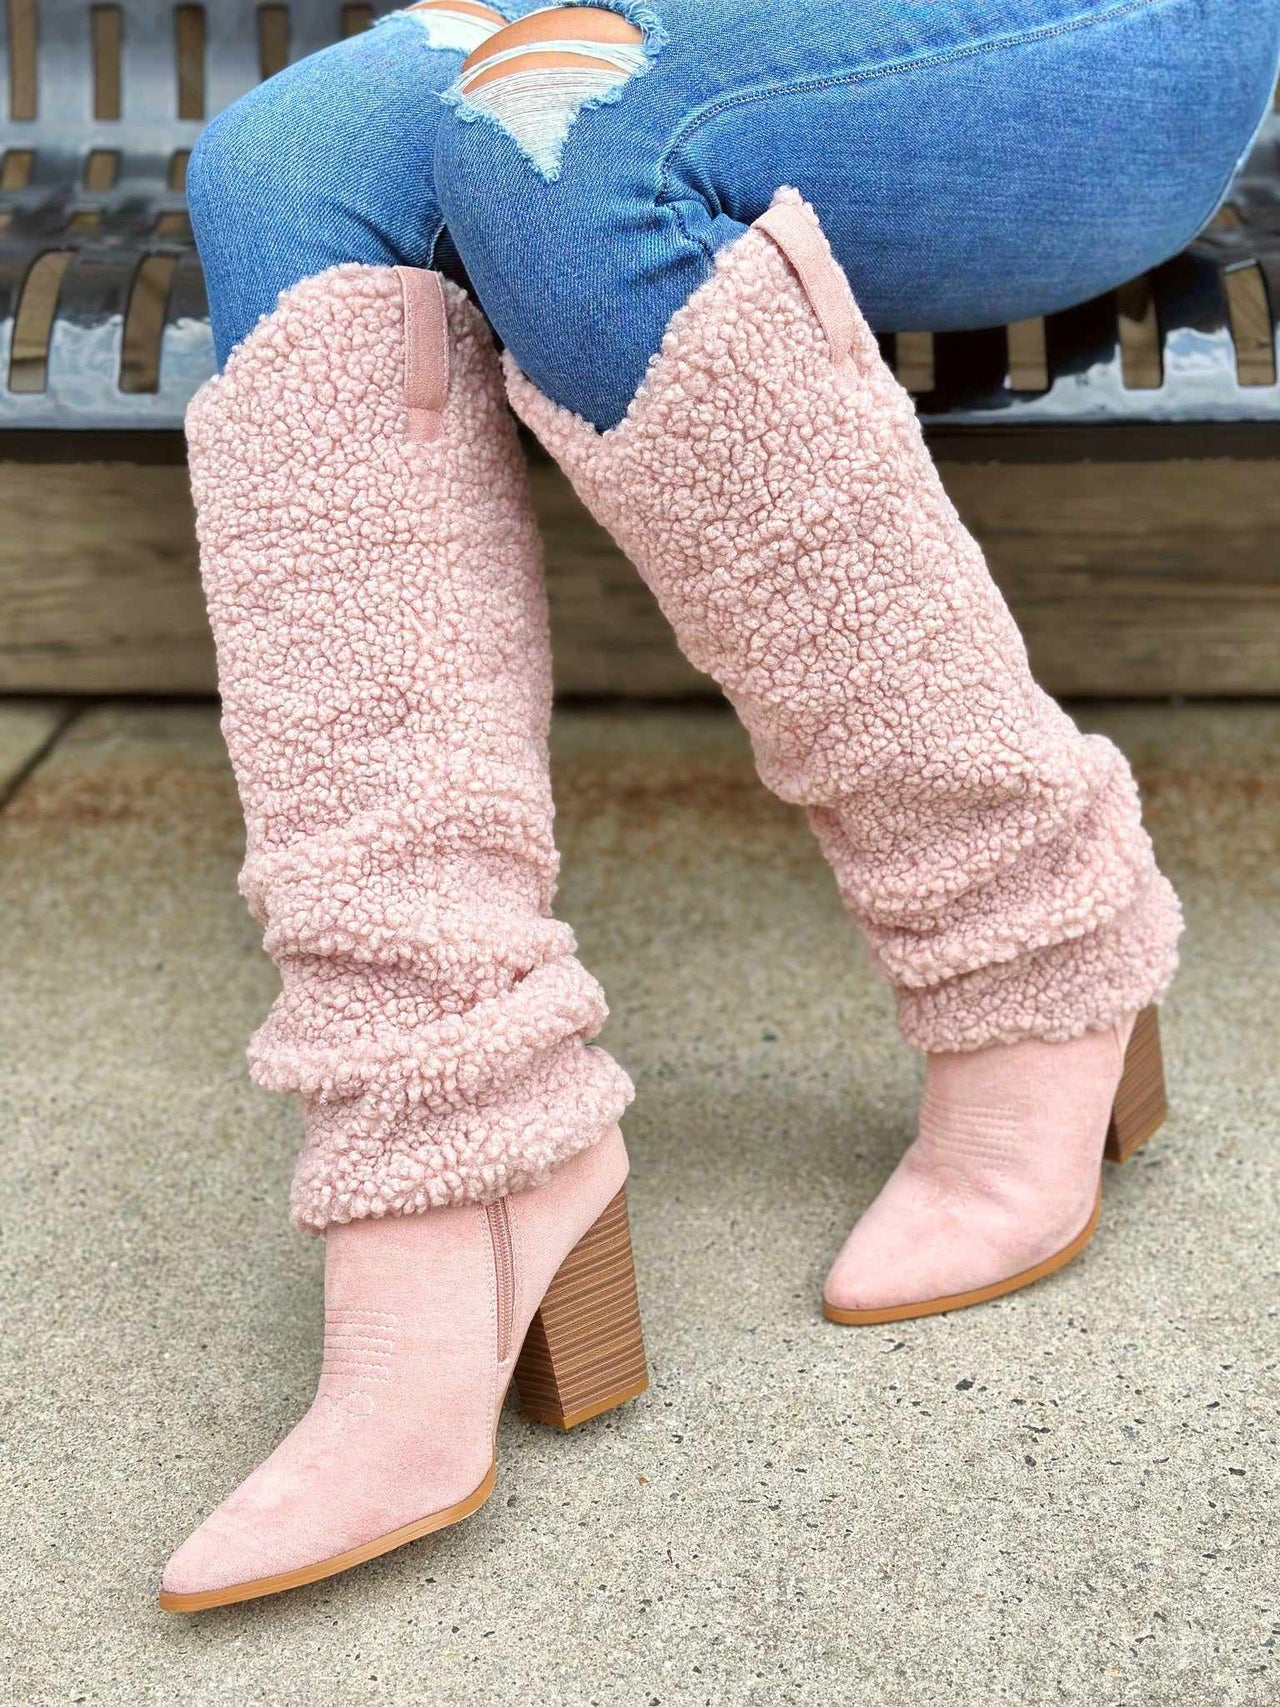 Sherpa sweater knee high boots in blush